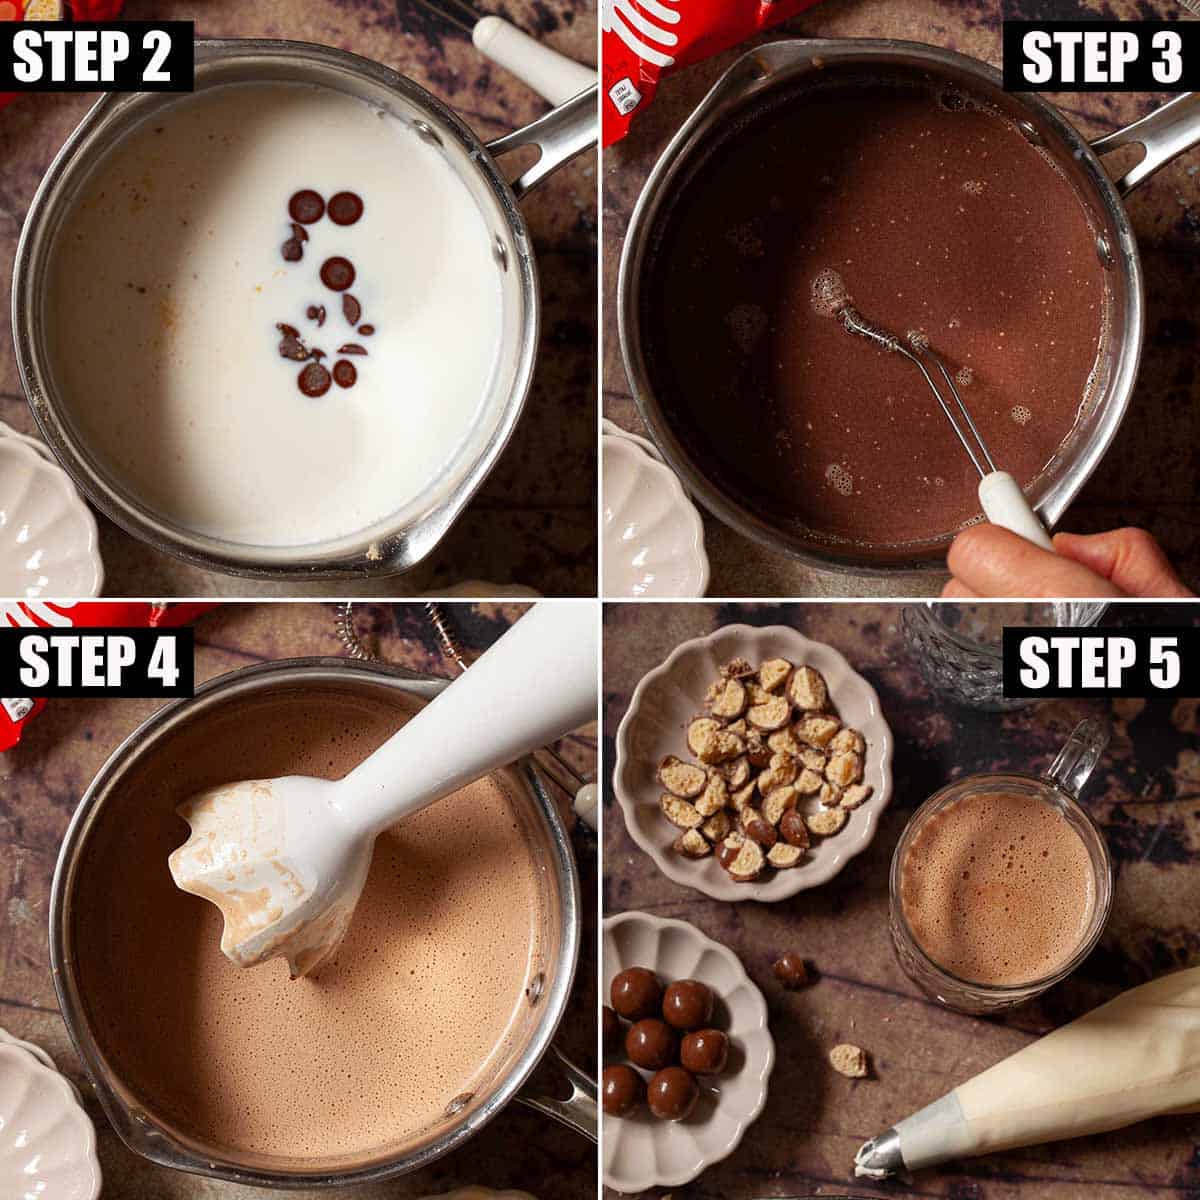 Collage of images showing a malted hot chocolate drink being made.